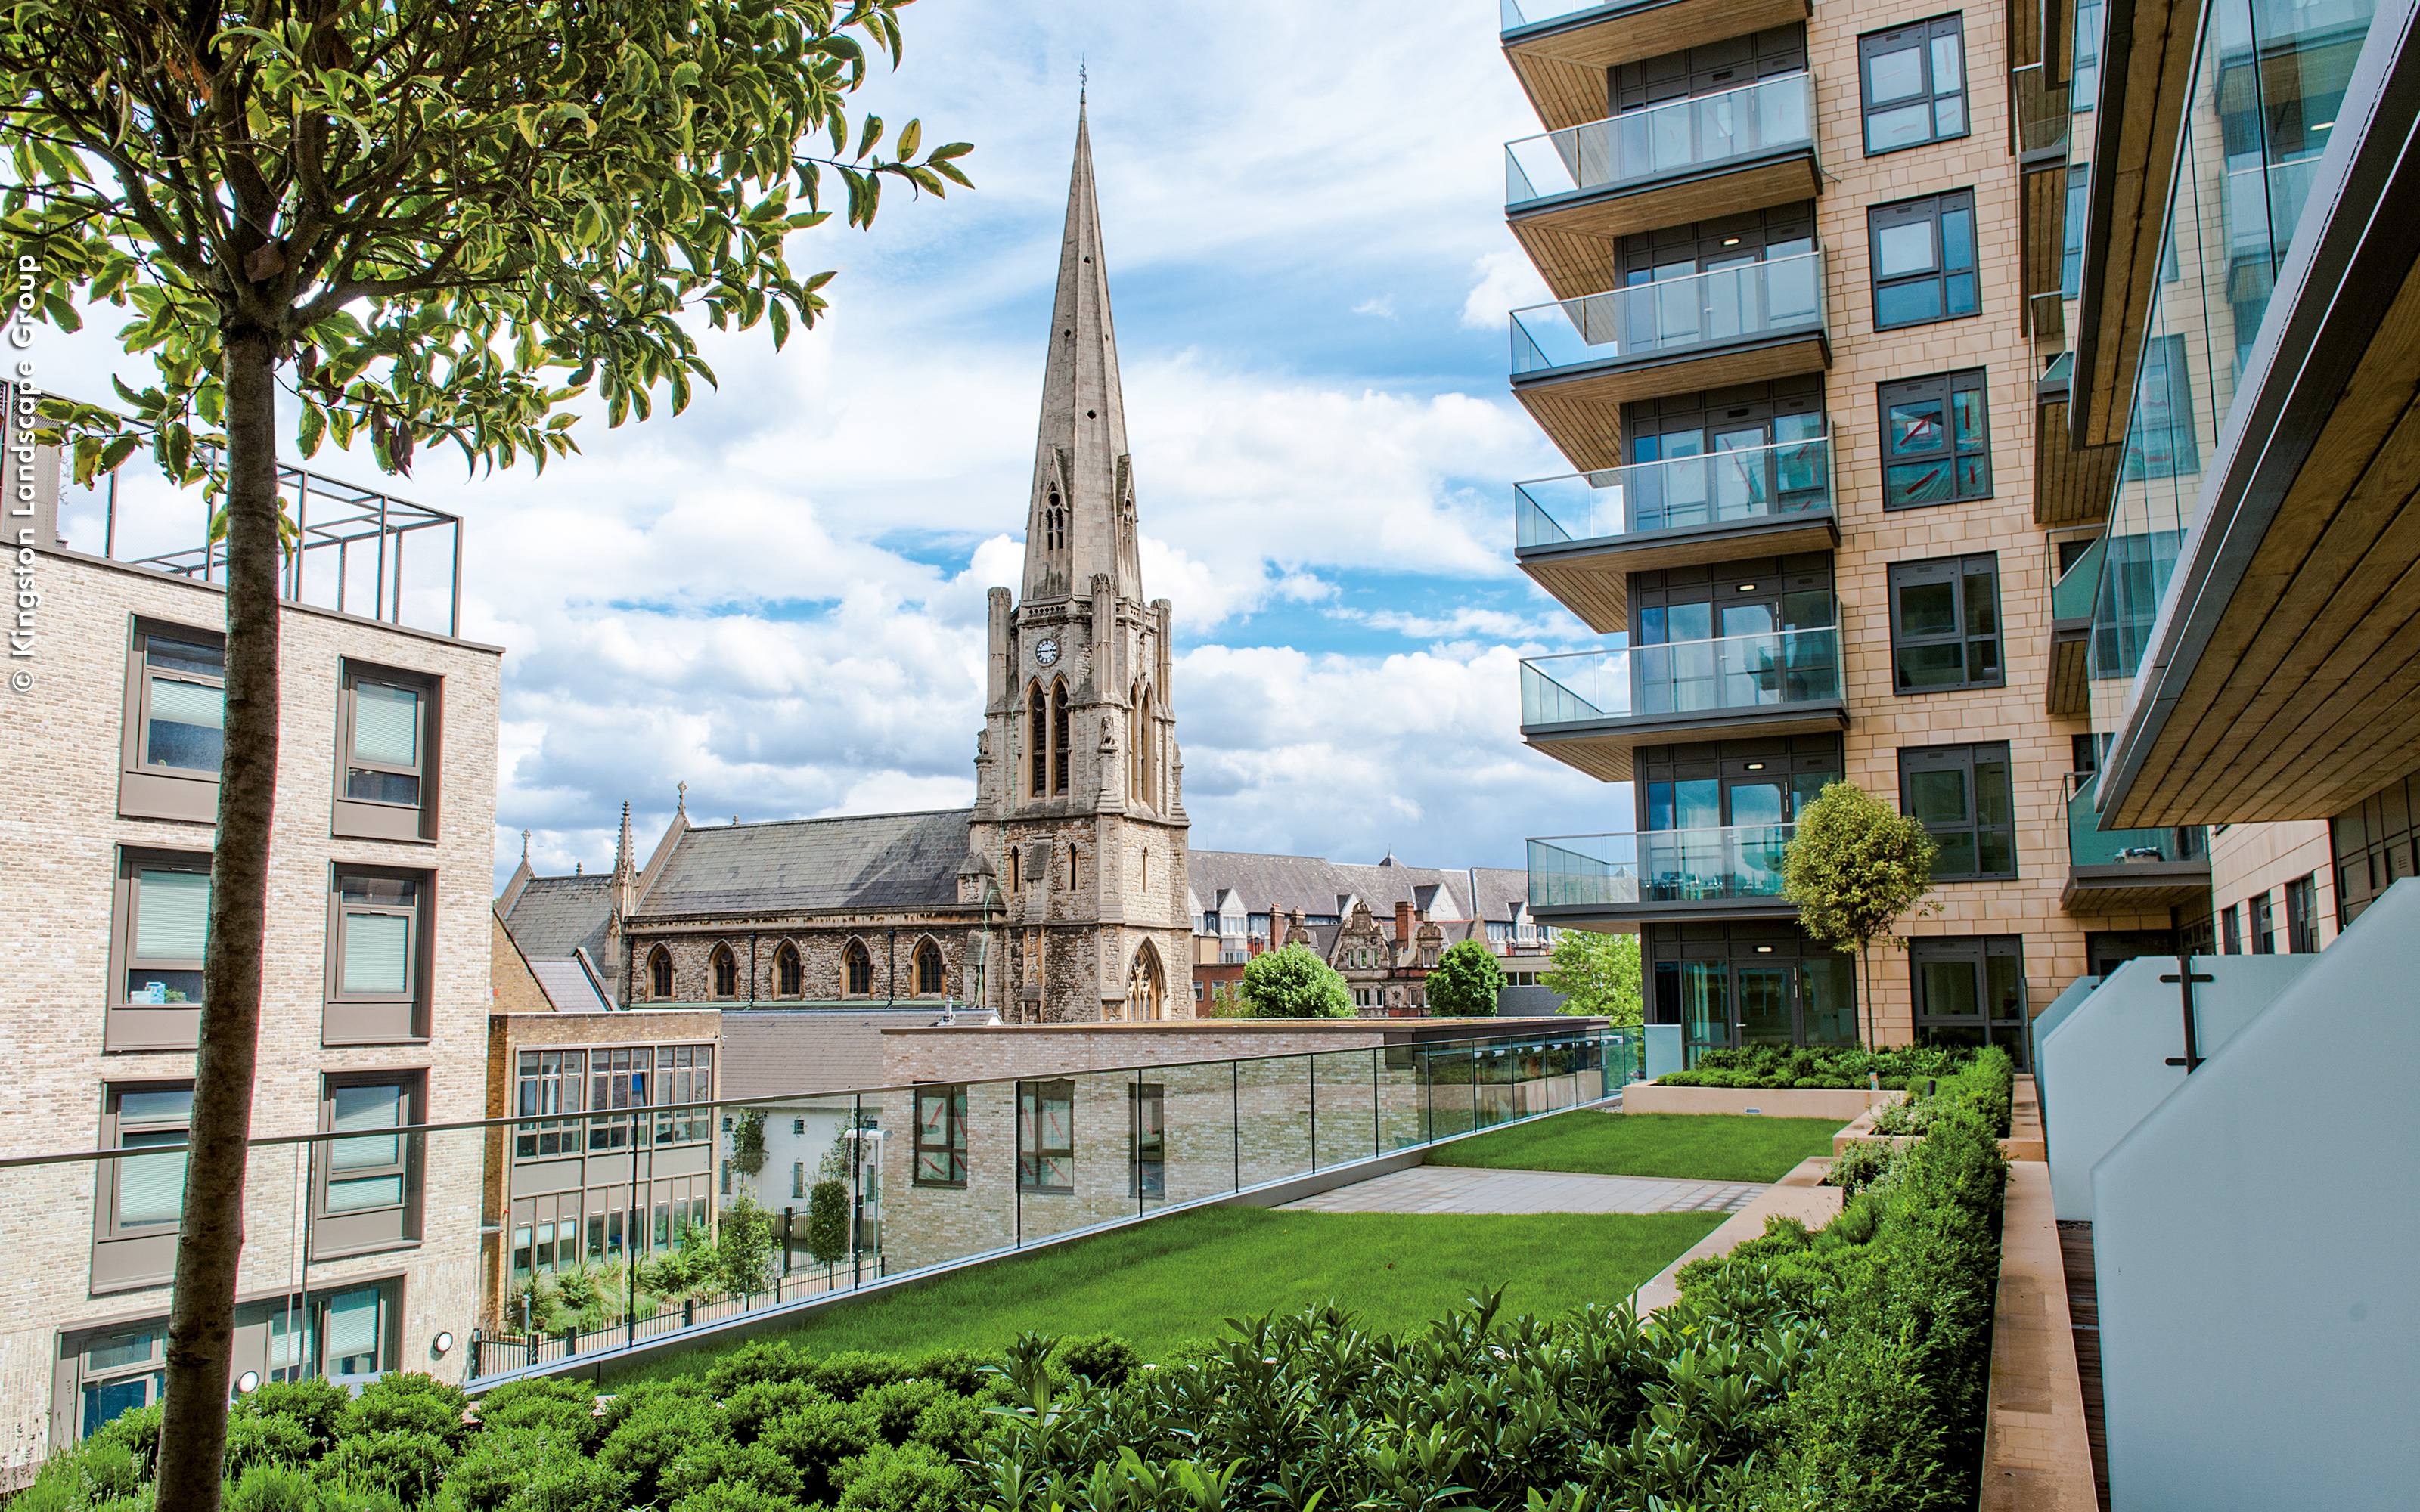 Roof garden with lawn and small trees with a view onto a church